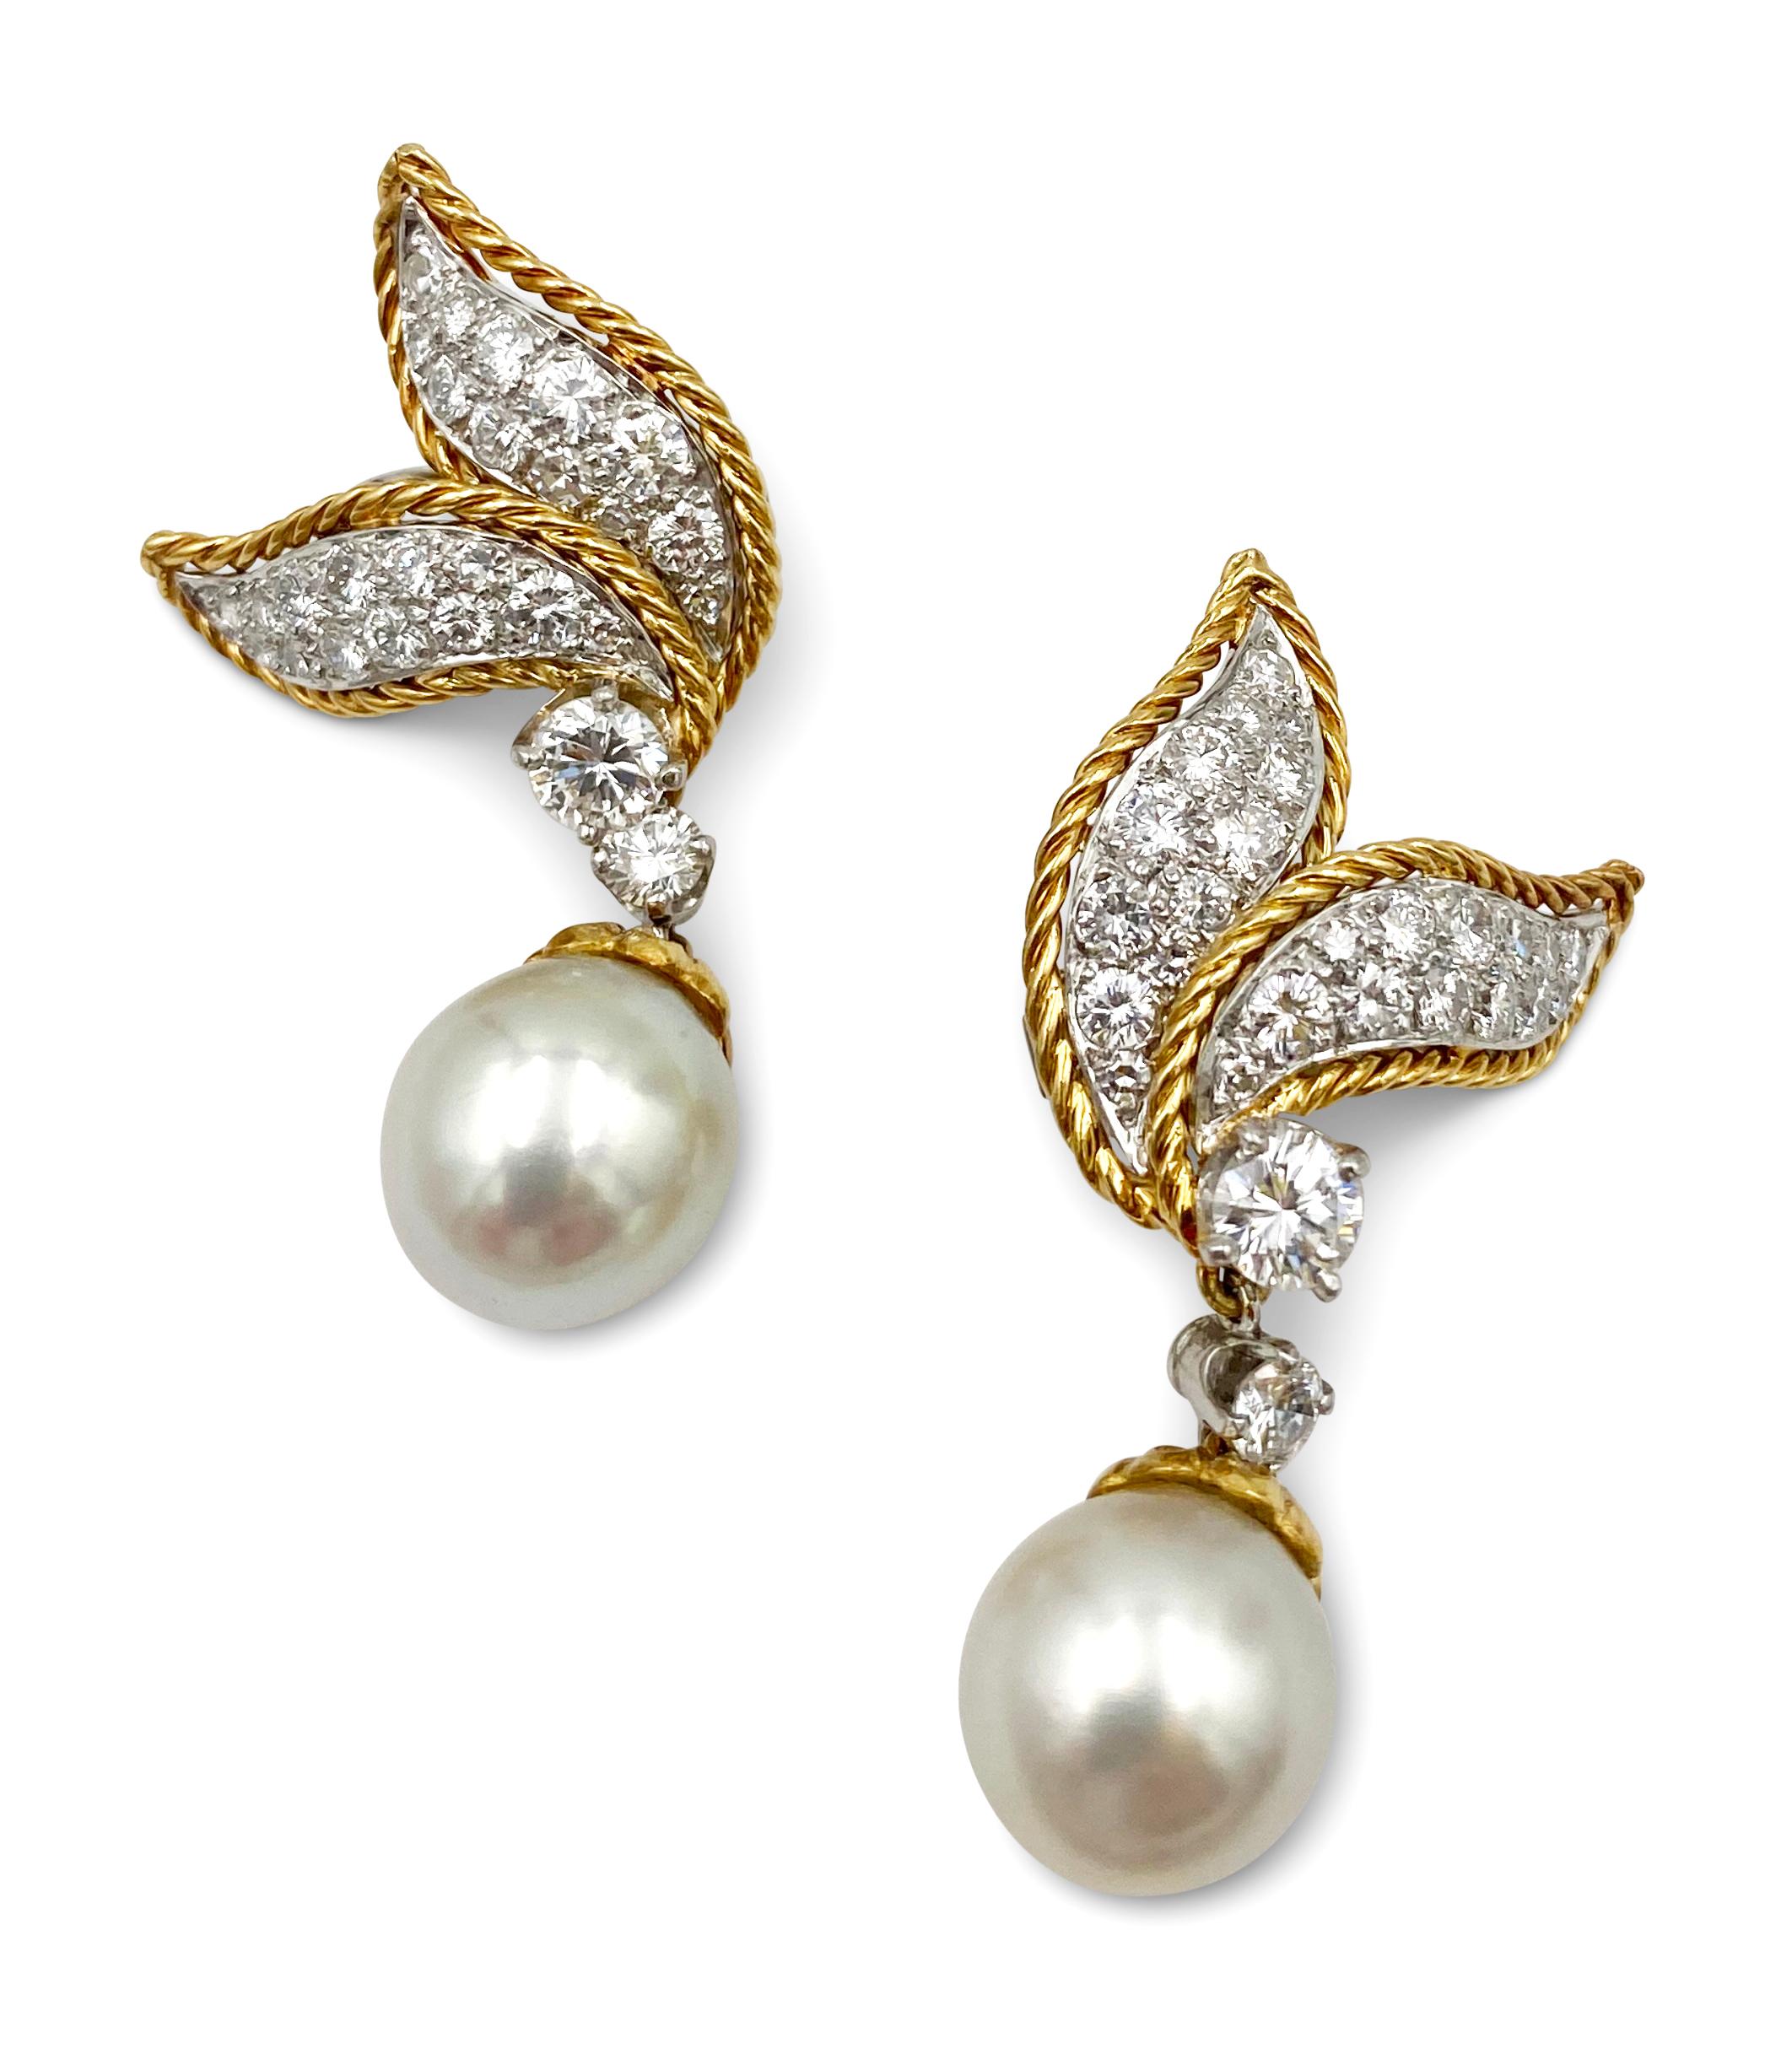 Vintage 1960s Van Cleef & Arpels diamond and pearl ear clips made in 18 karat yellow gold. The earrings feature a leaf motif set with round brilliant cut diamonds (E-G in color, VS clarity) of an estimated 2.0 carats set in platinum and completed